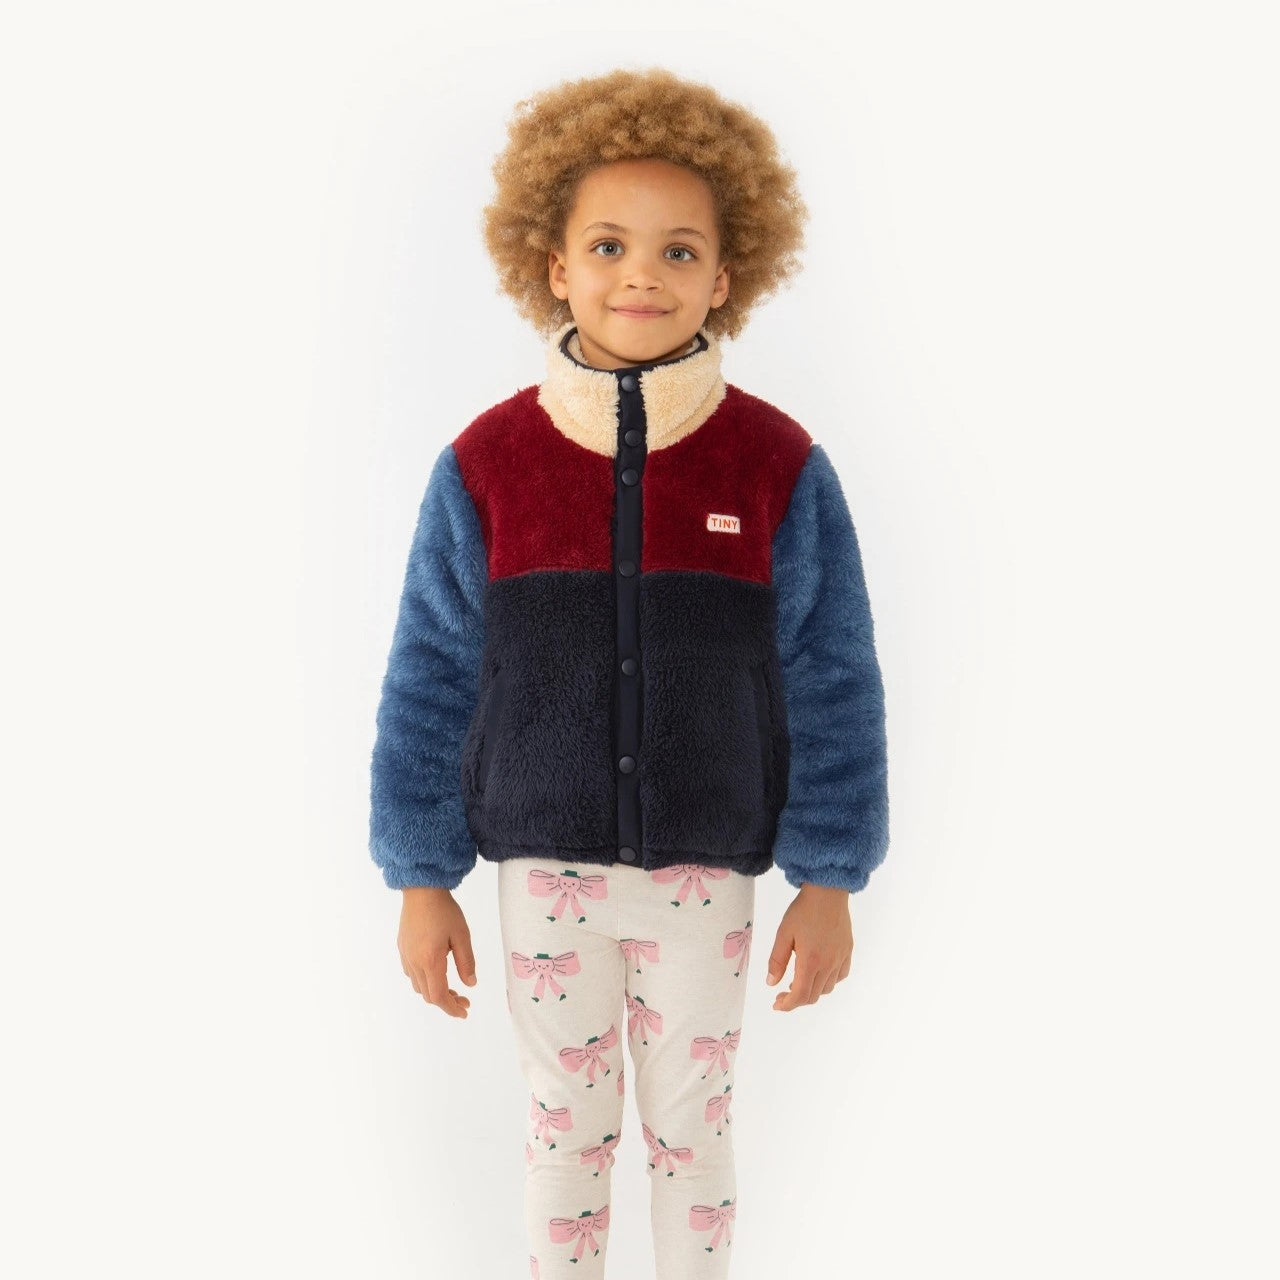 ﻿TINYCOTTONS Color Block Polar Sherpa Jacket Navy Deep Red ALWAYS SHOW